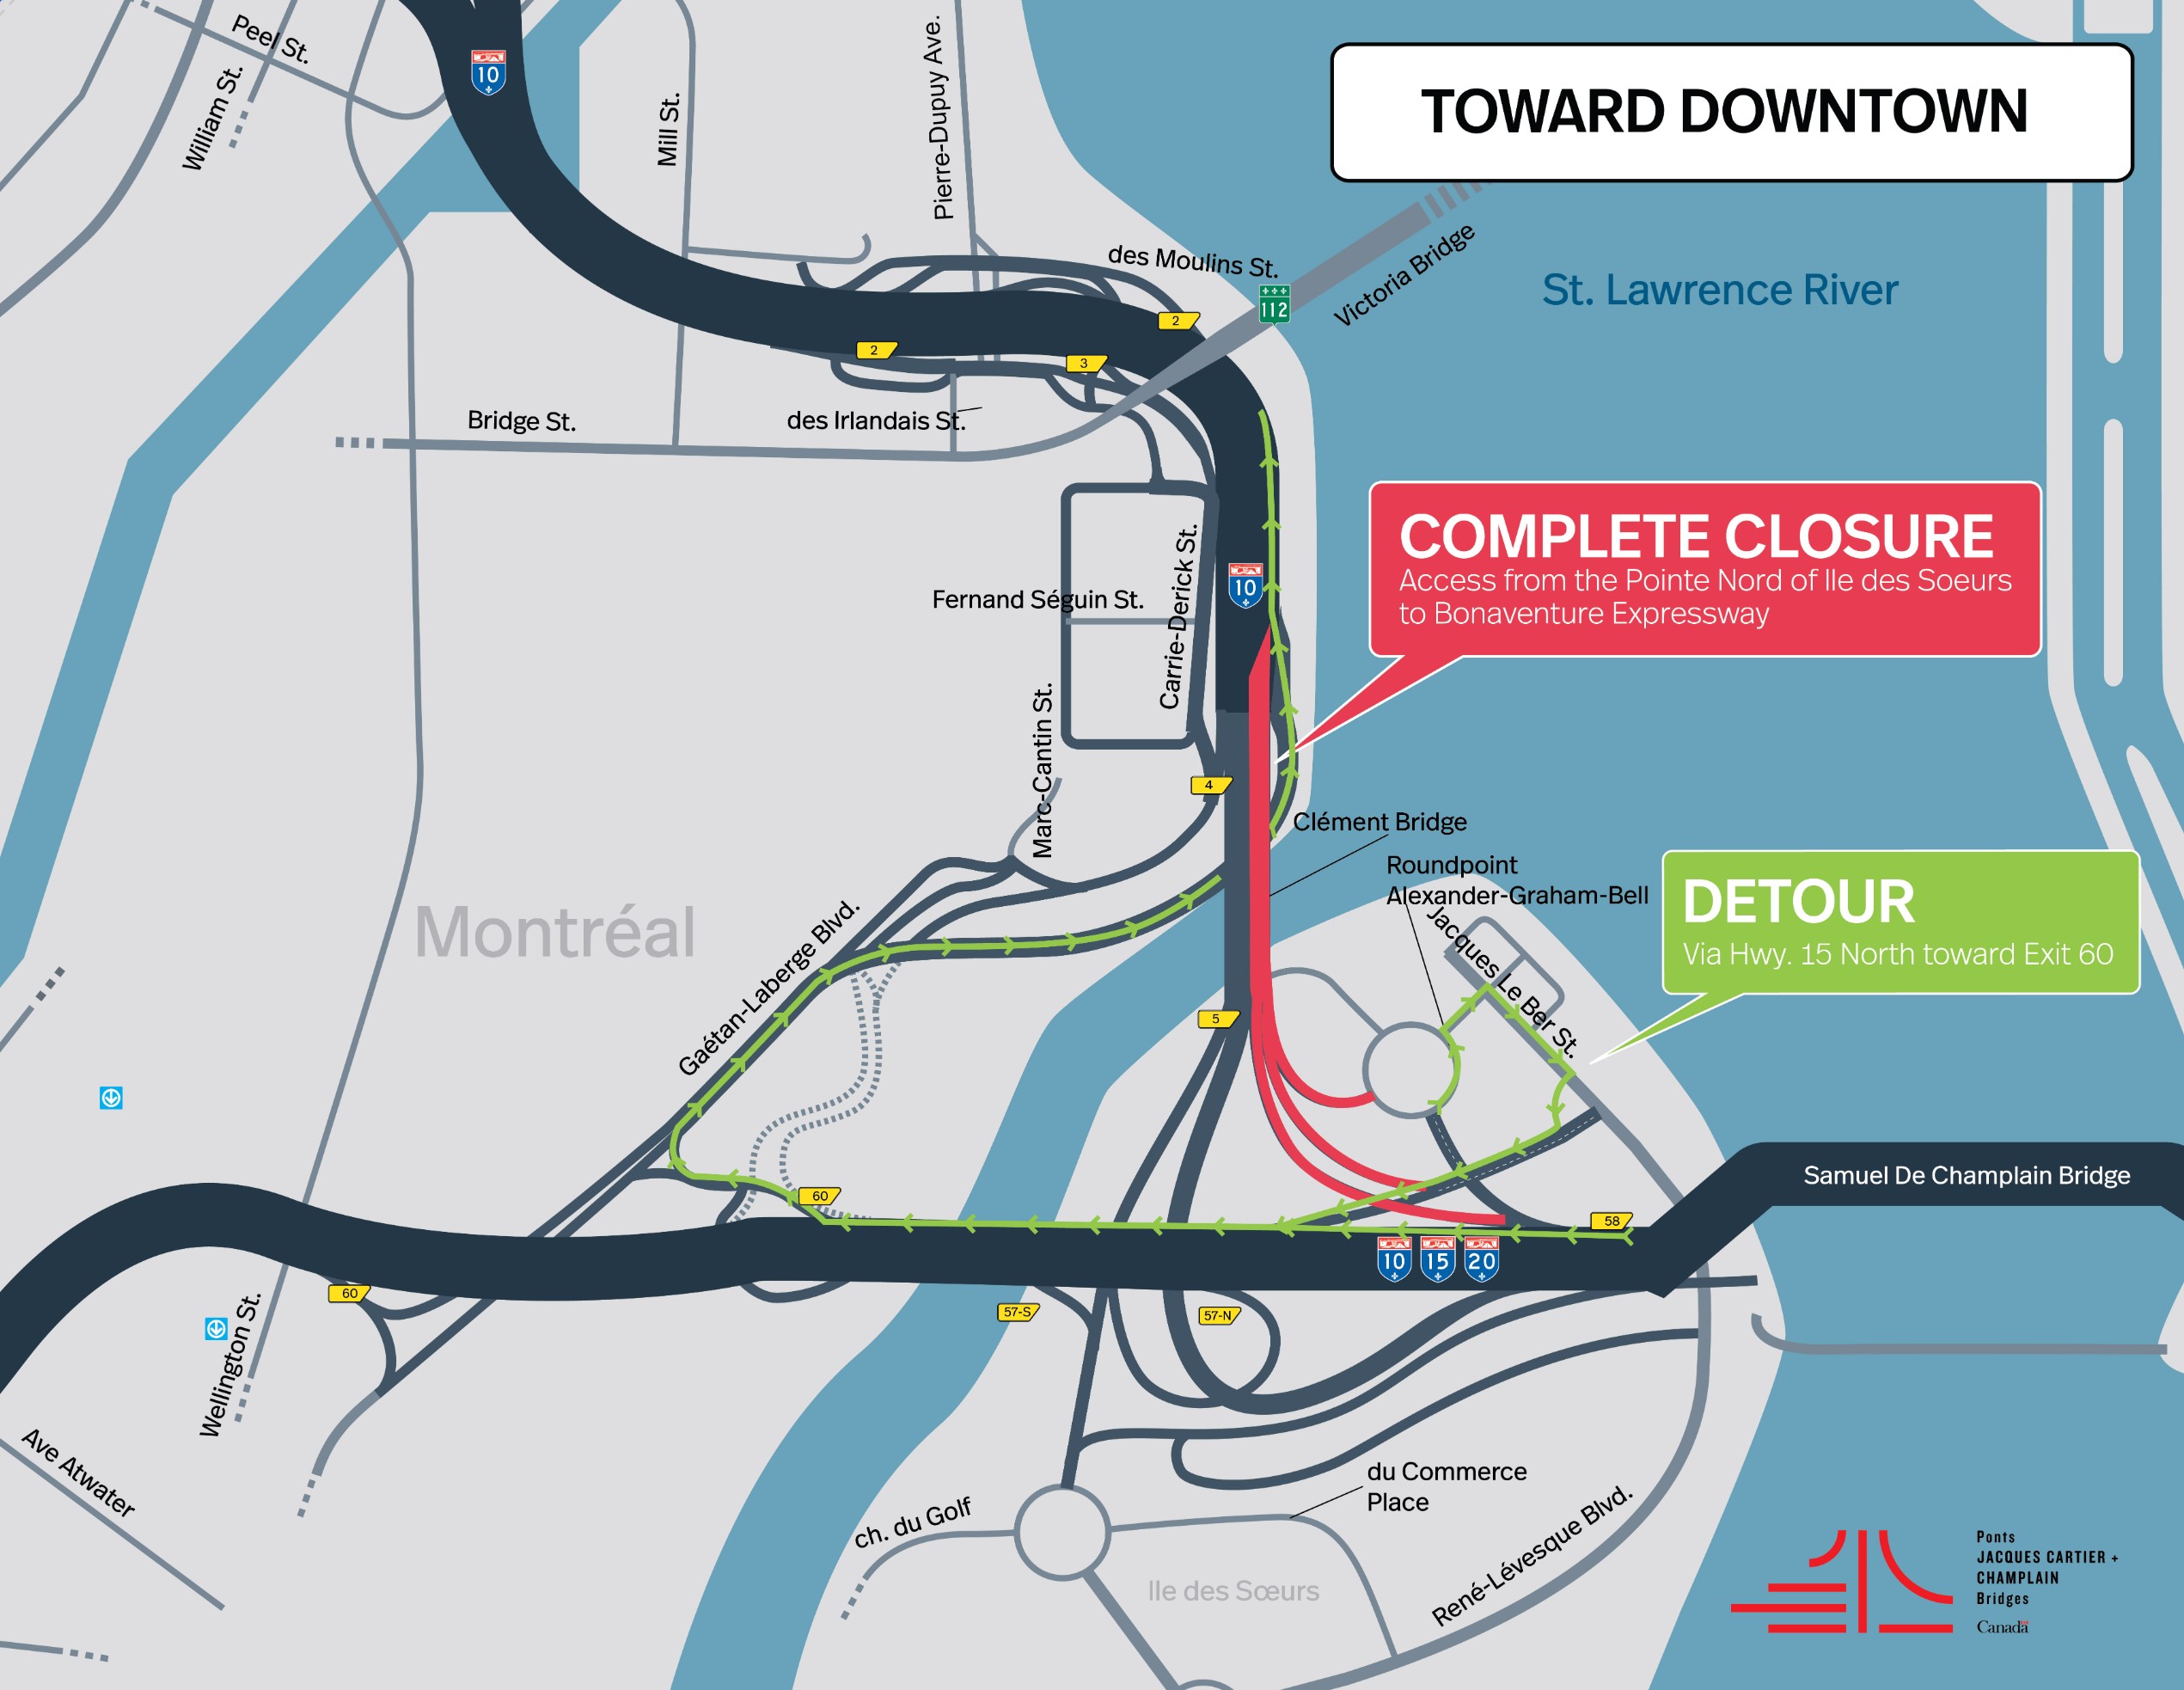 Bonaventure Expy. | Île des Sœurs sector: Complete night closure of access ramps to the Expy., toward downtown, on July 15 and 16